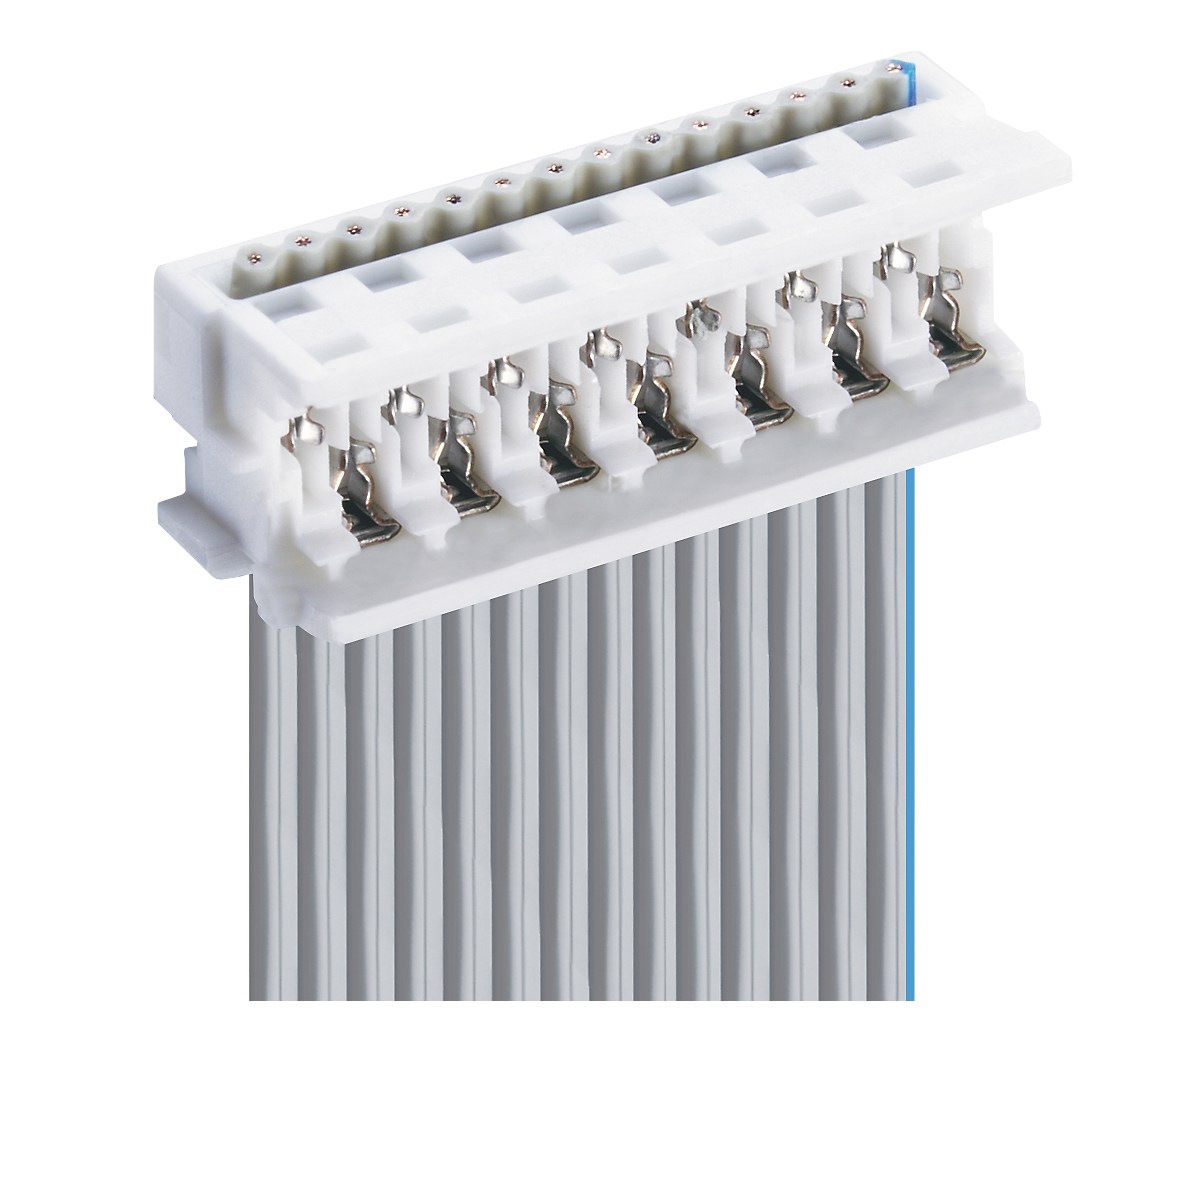 Lumberg: MICA VP3 (Series 30 | Micromodul™ connectors, pitch 1.27 mm)